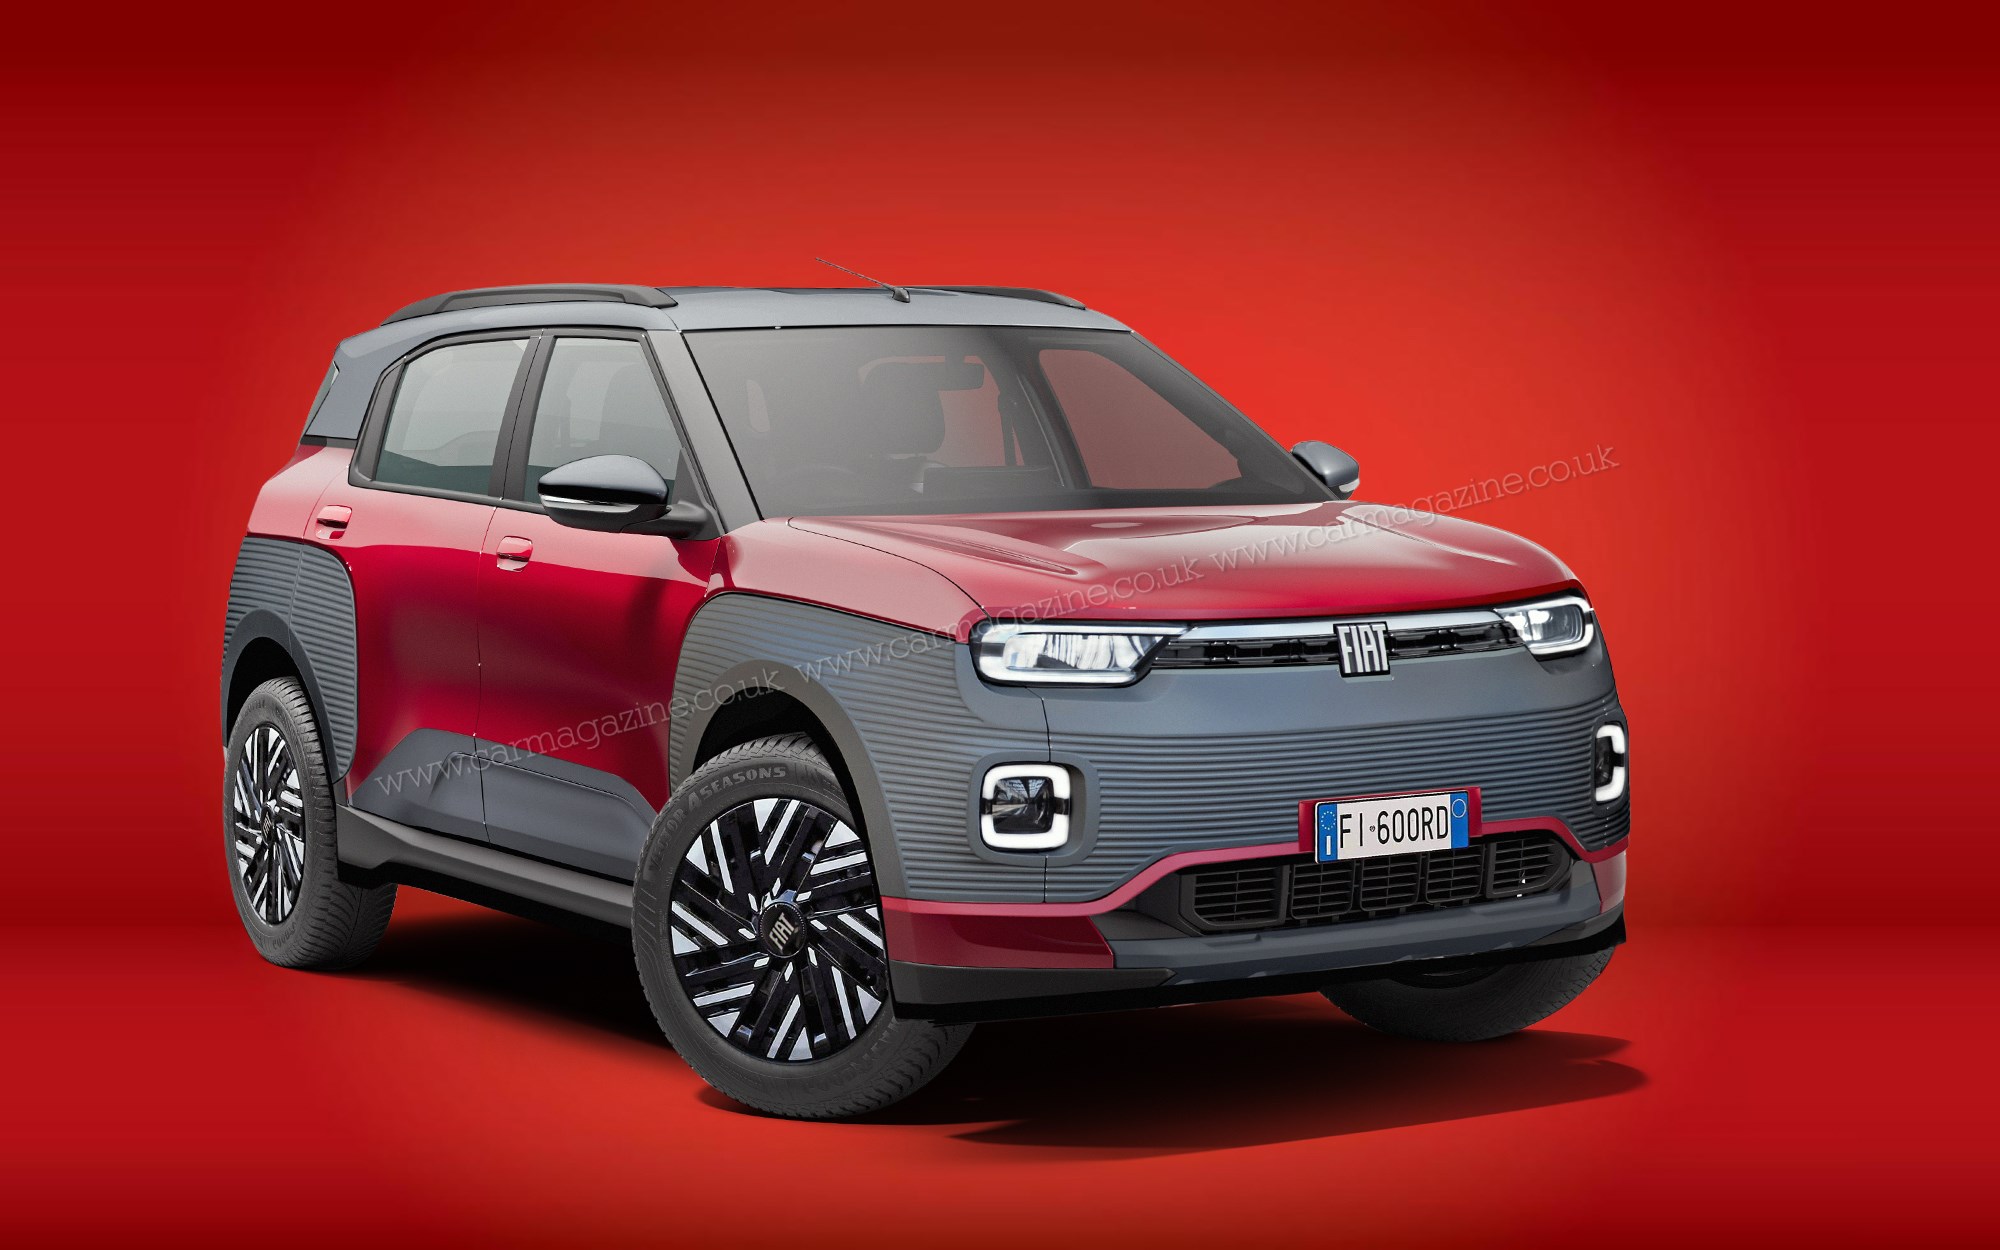 Chic new Fiat Panda due for launch in 2024